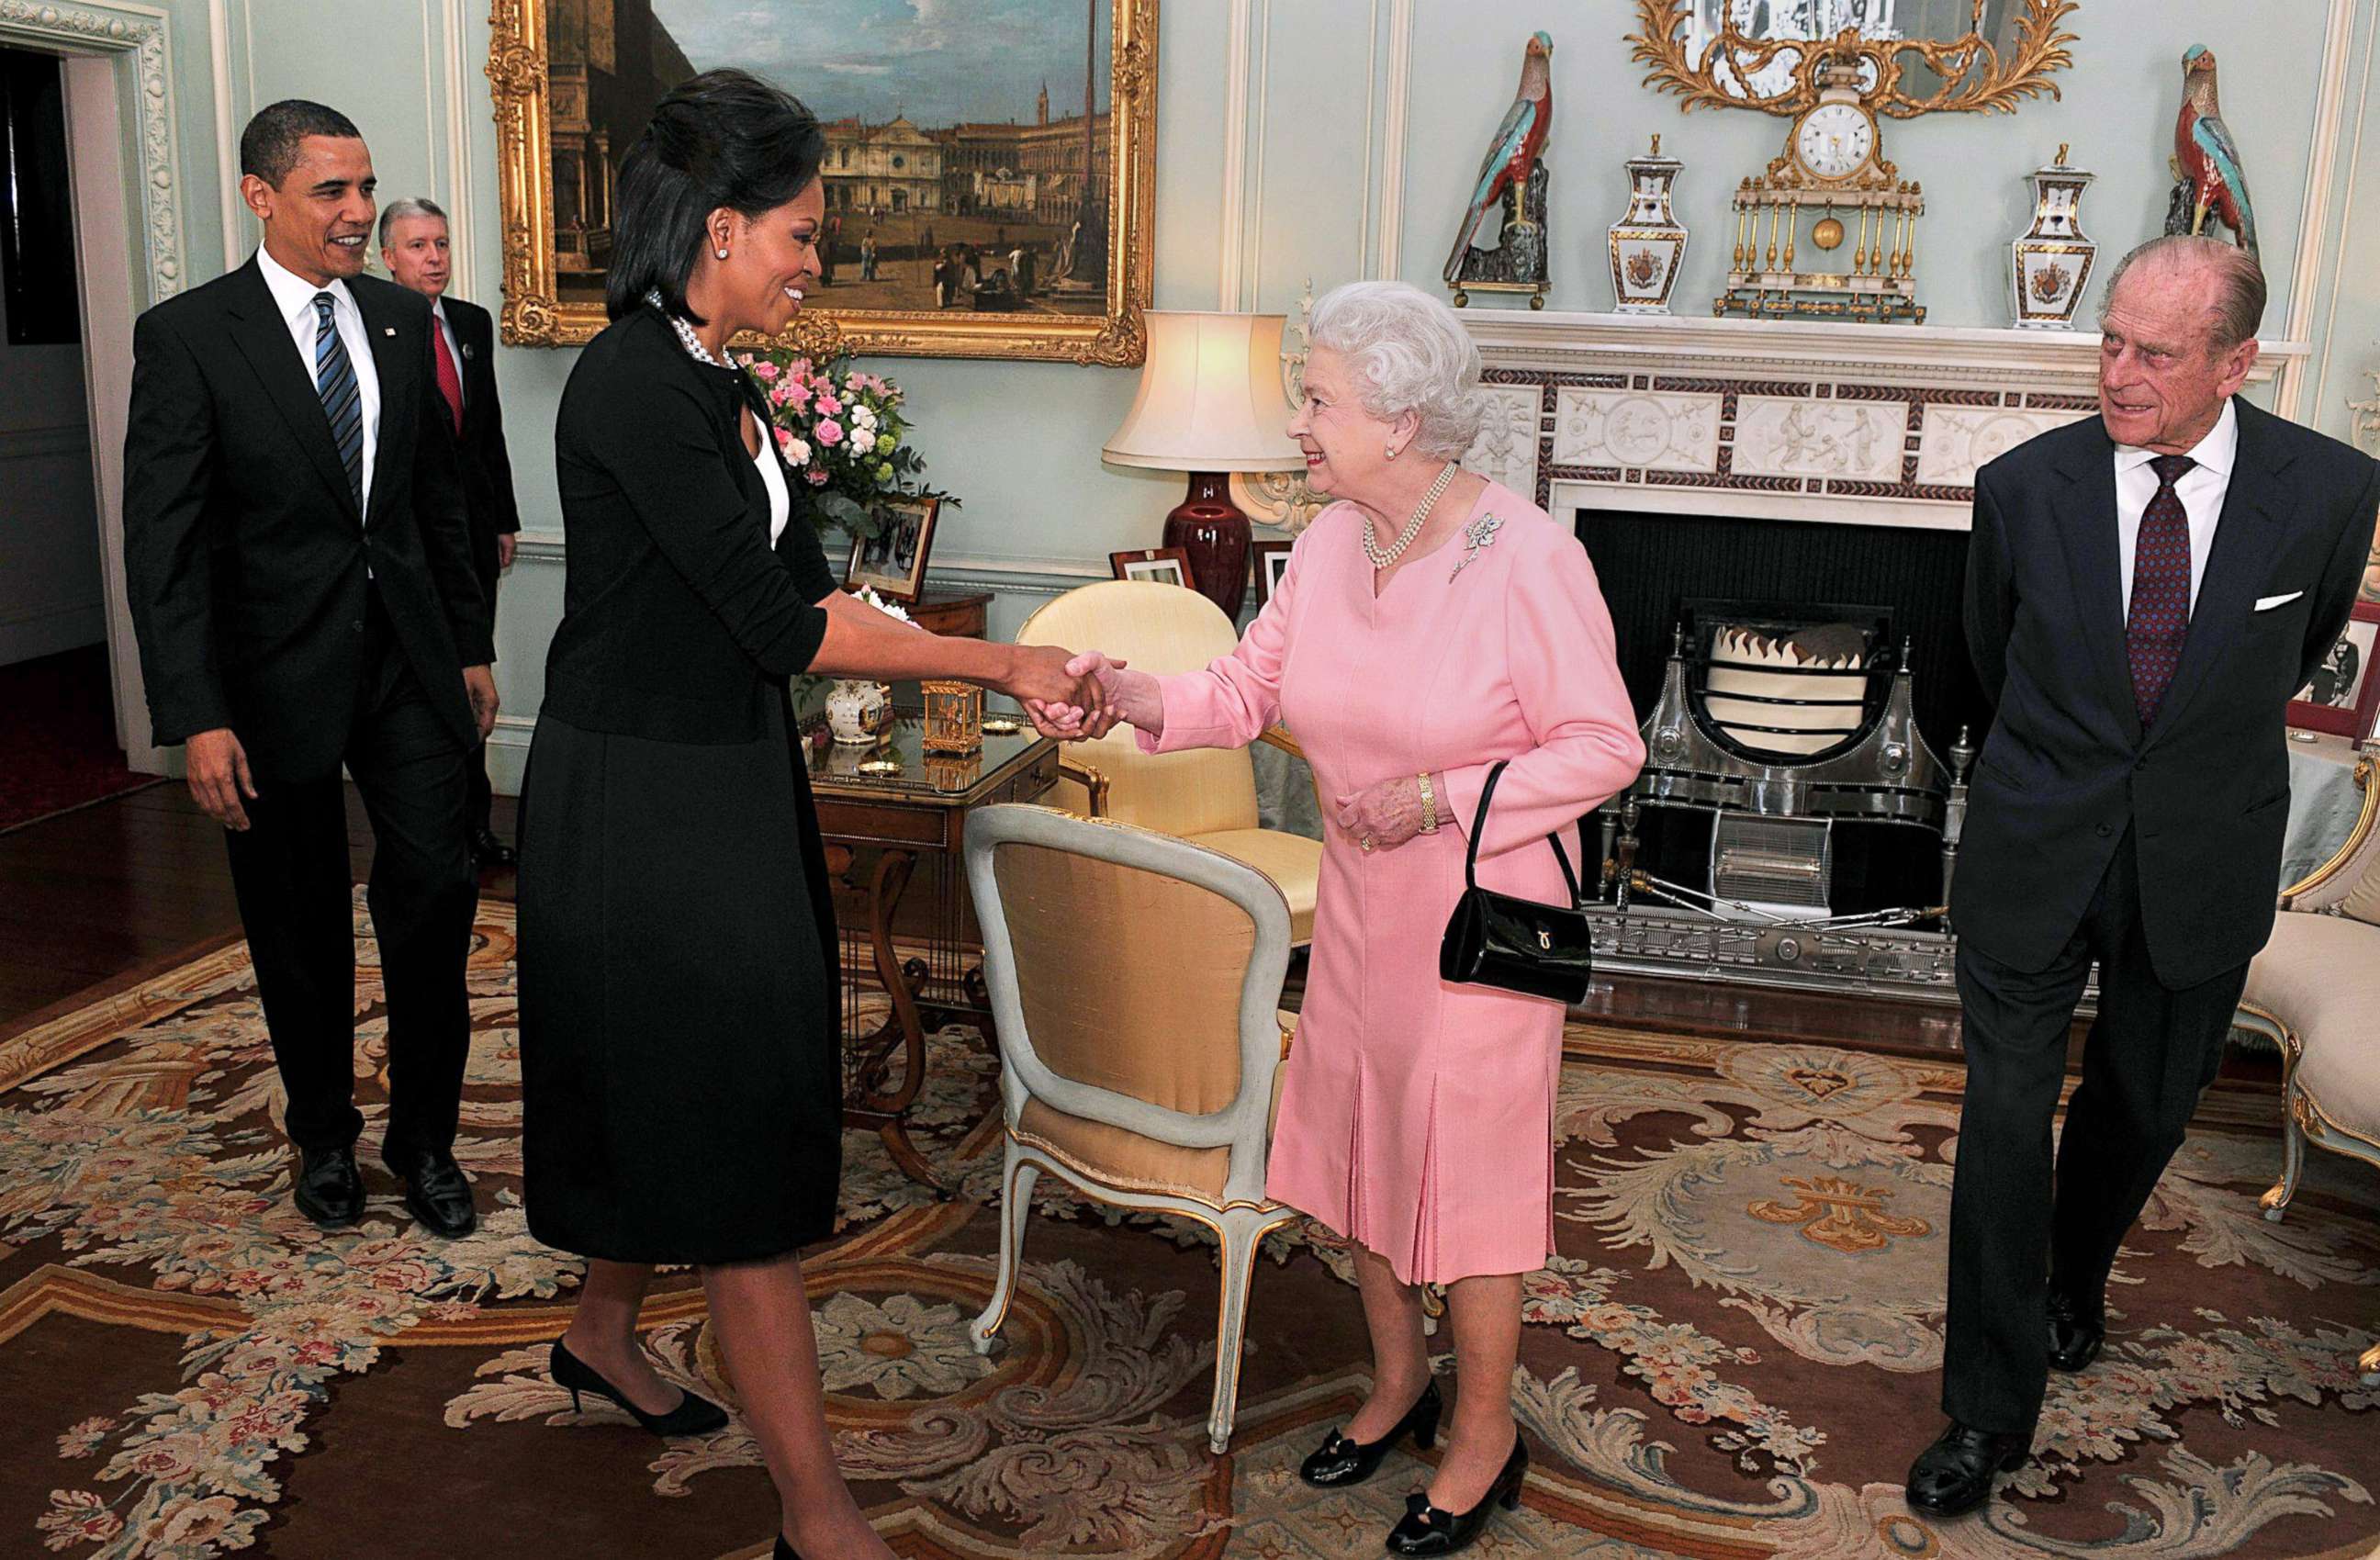 PHOTO: President Barack Obama and his wife Michelle Obama meet with Queen Elizabeth II and Prince Philip, Duke of Edinburgh, during an audience at Buckingham Palace on April 1, 2009 in London.